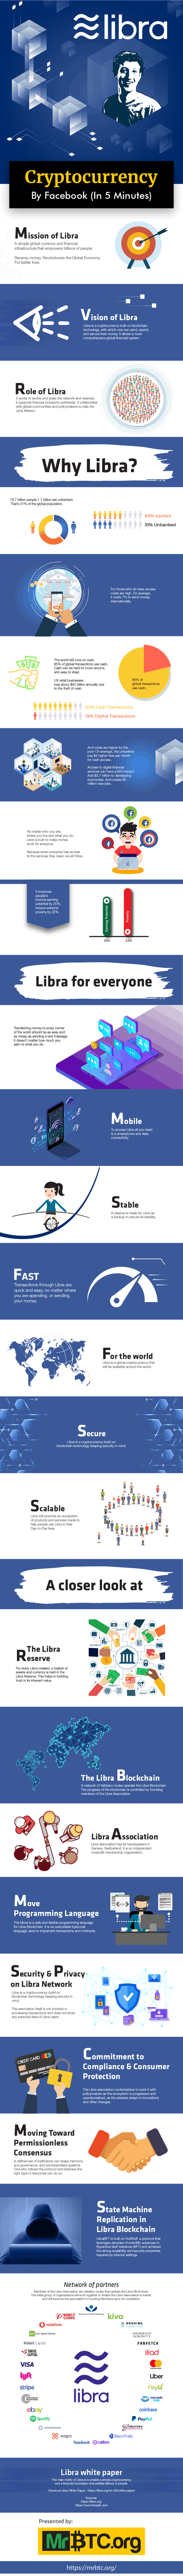 Libra ctrptocurrency by Facebook infographic